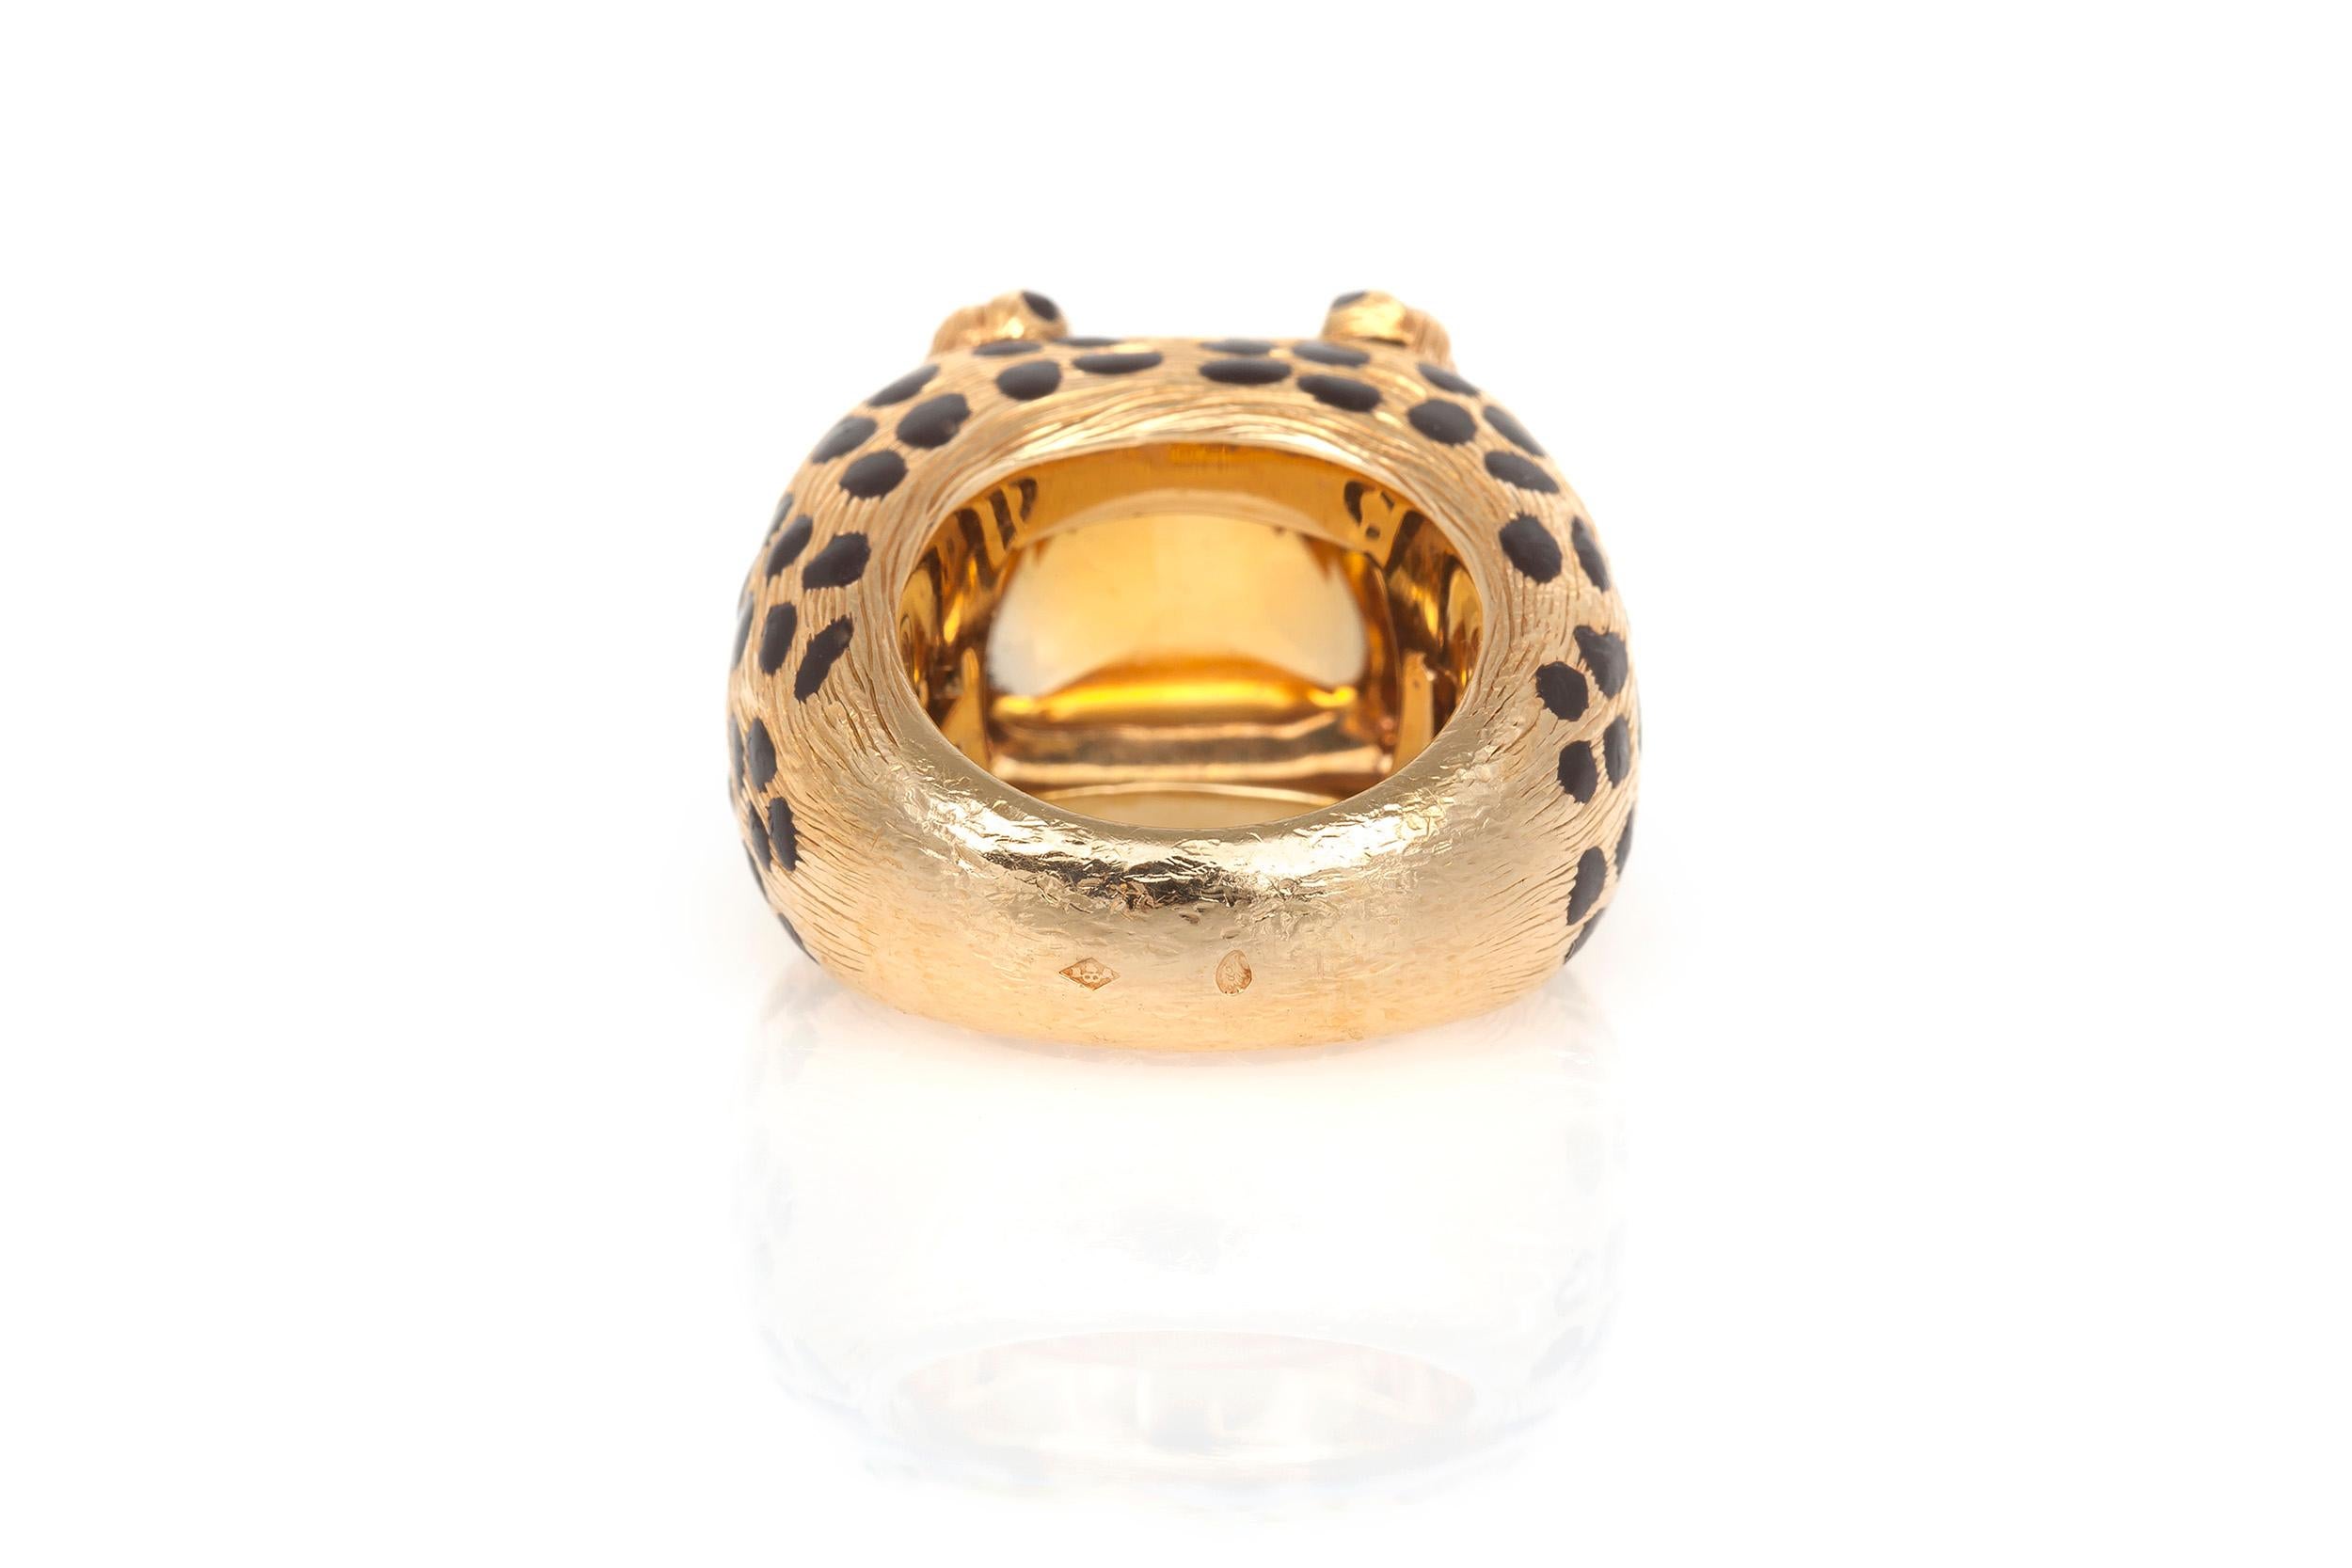 Christian Dior Ring crafted in 18K yellow gold decorated by black enamel leopard spots. At the center one square-shaped sugarloaf cabochon citrine is quartered by clasping leopard paws.